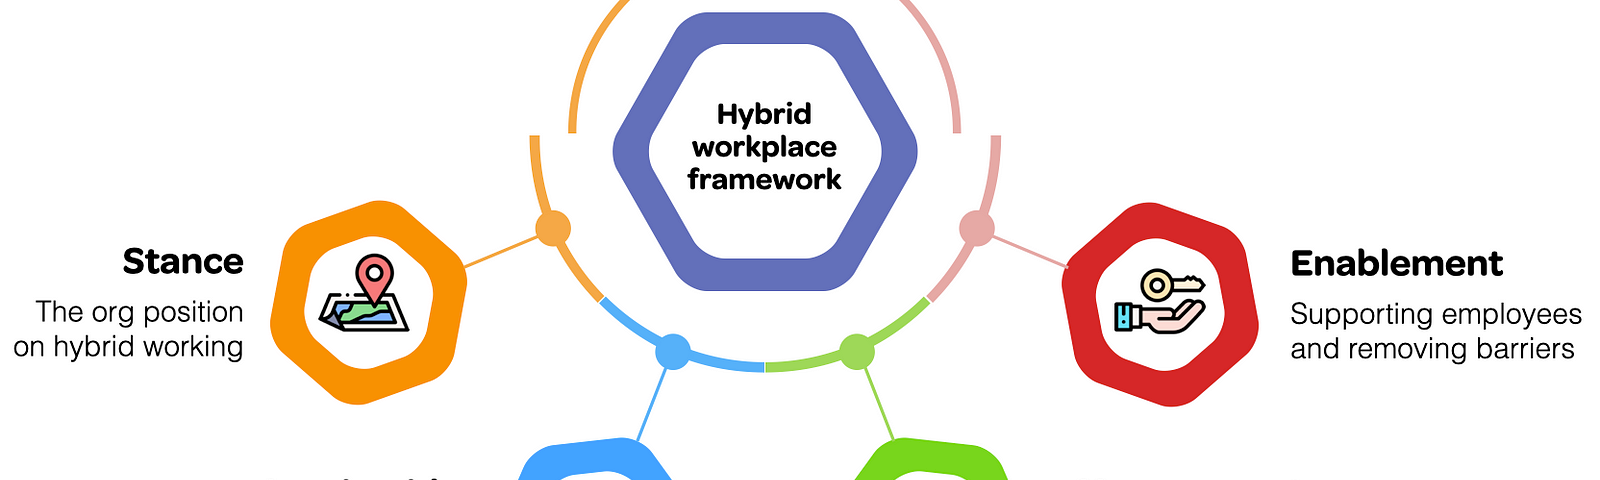 A strategic framework for the shift to the emerging hybrid workplace